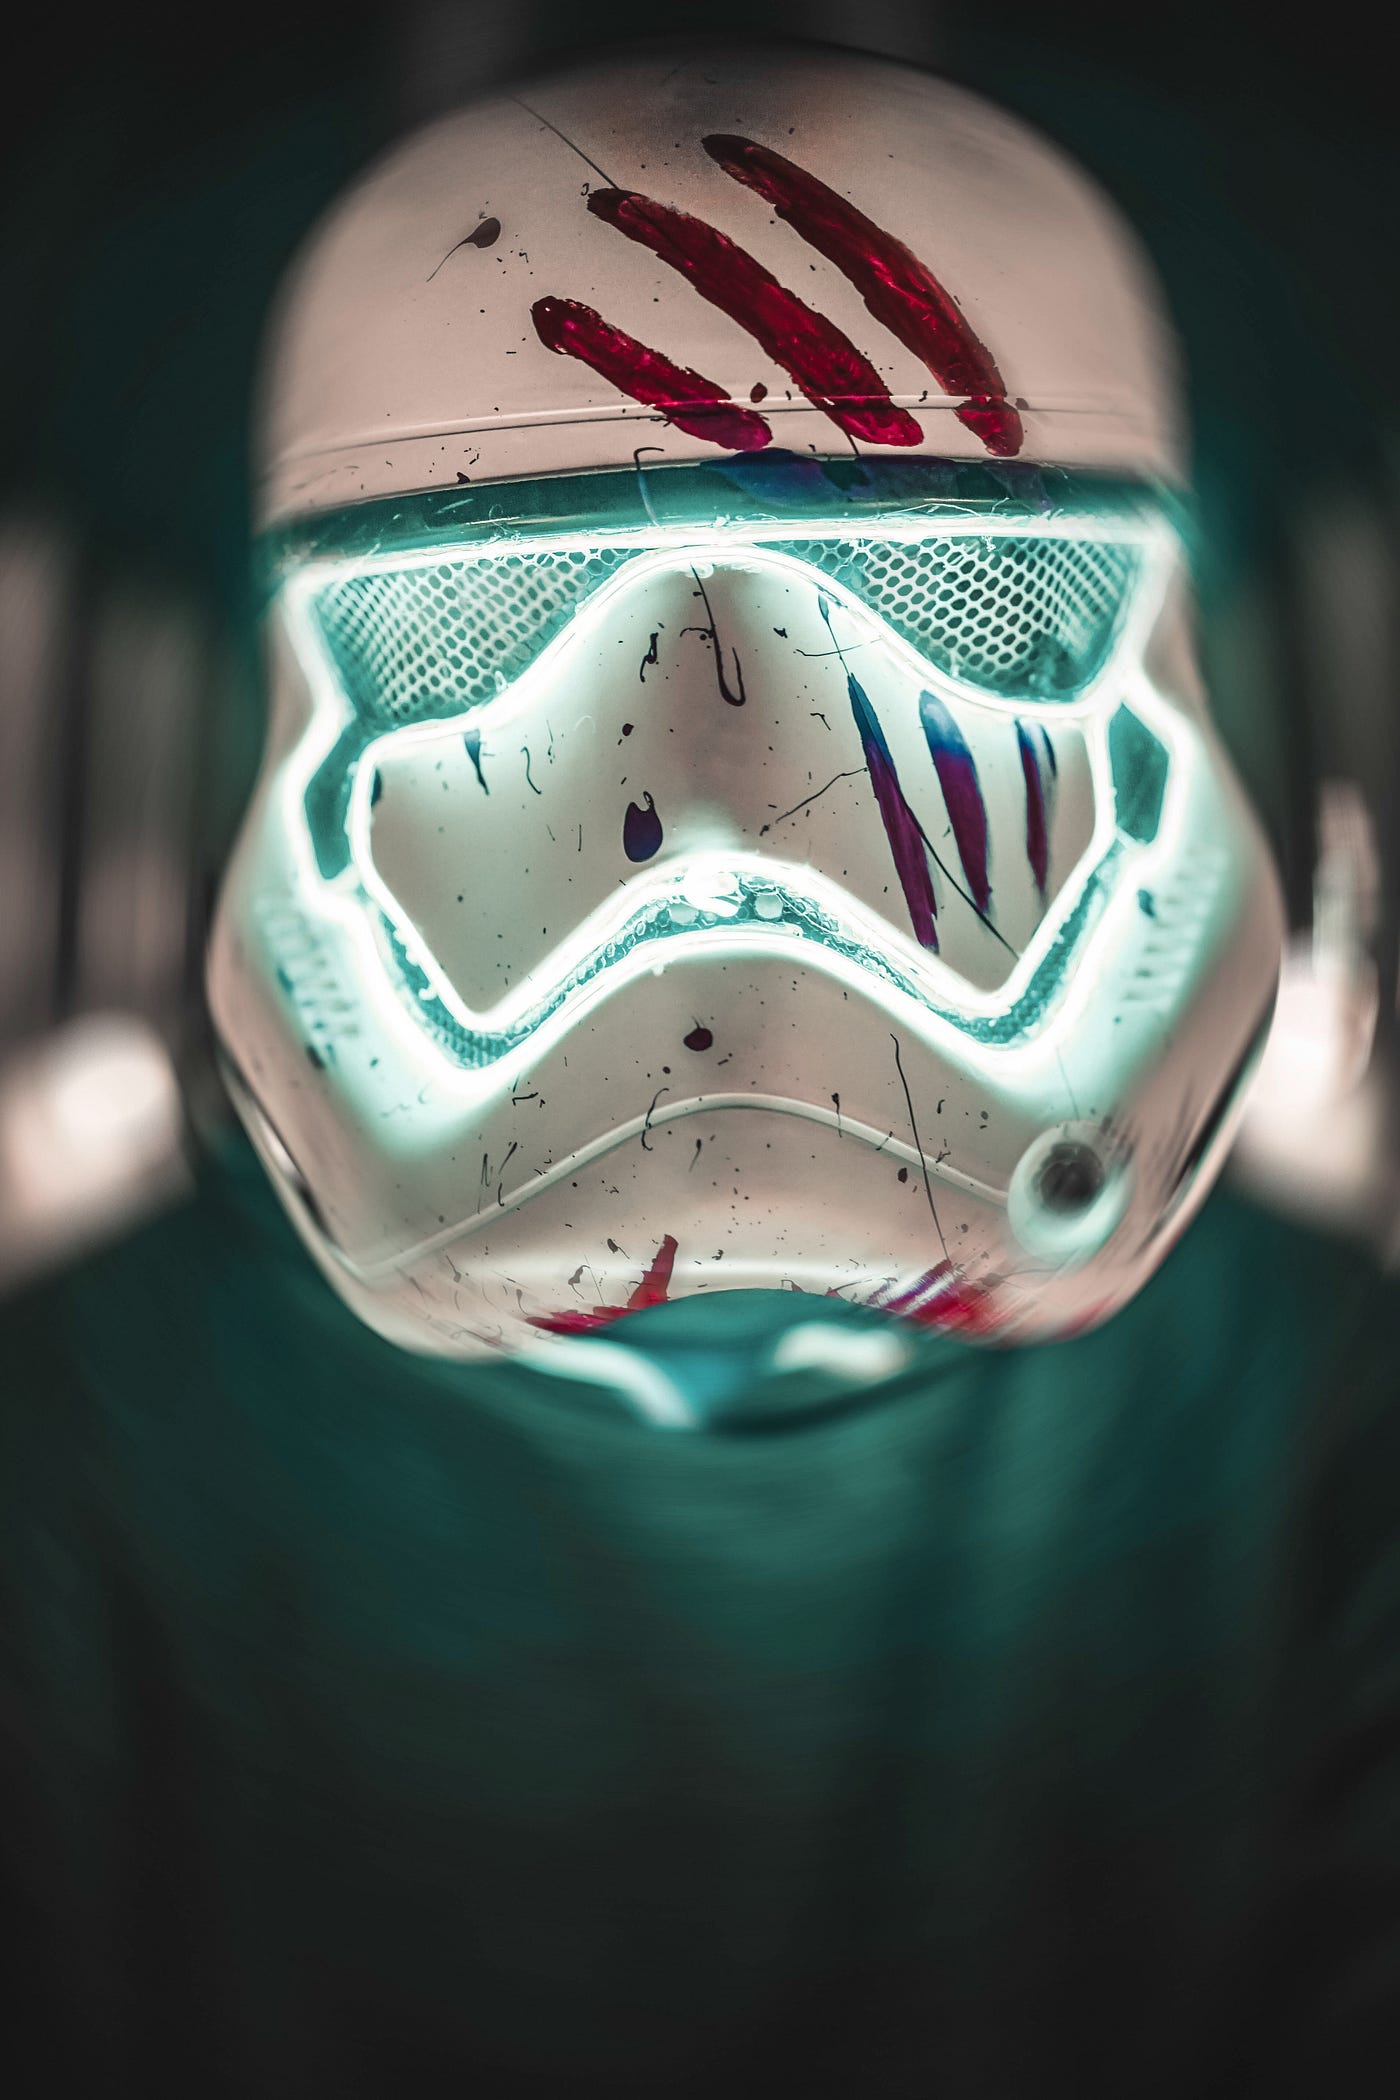 White futuristic full head Storm Trooper helmet glowing with green eye pieces and mouth guard, scratches on the metal and blood smears